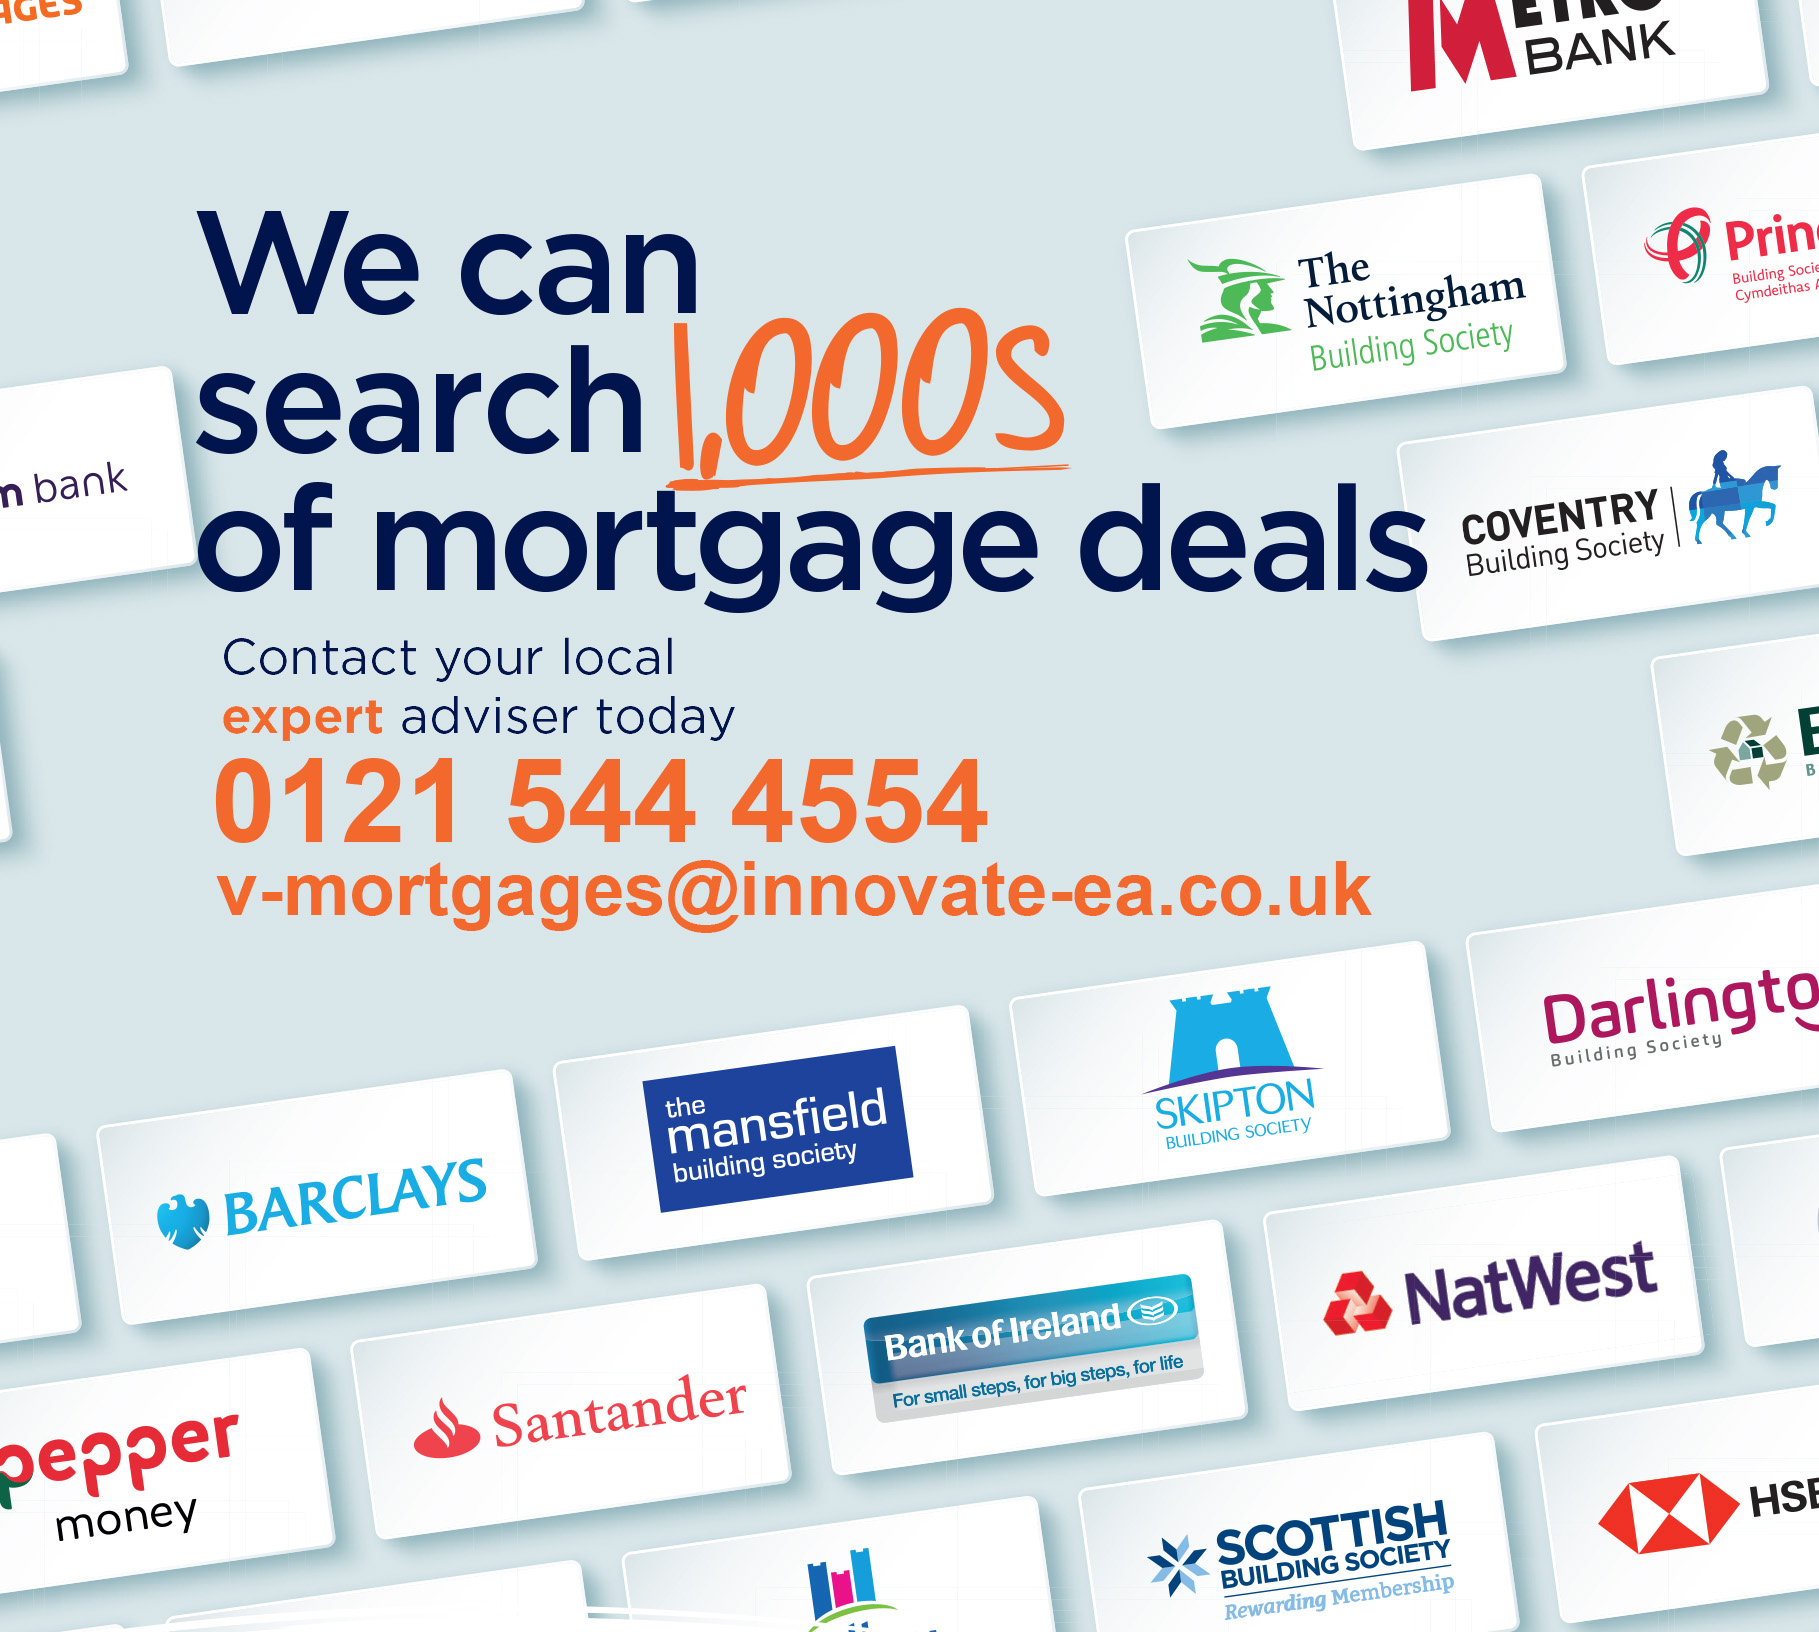 Innovate Estate Agents, Buy, Sell, Sandwell, Dudley, Birmingham, Wolverhampton, Rent, Let, Tenants, Landlords, Property, House, Lets